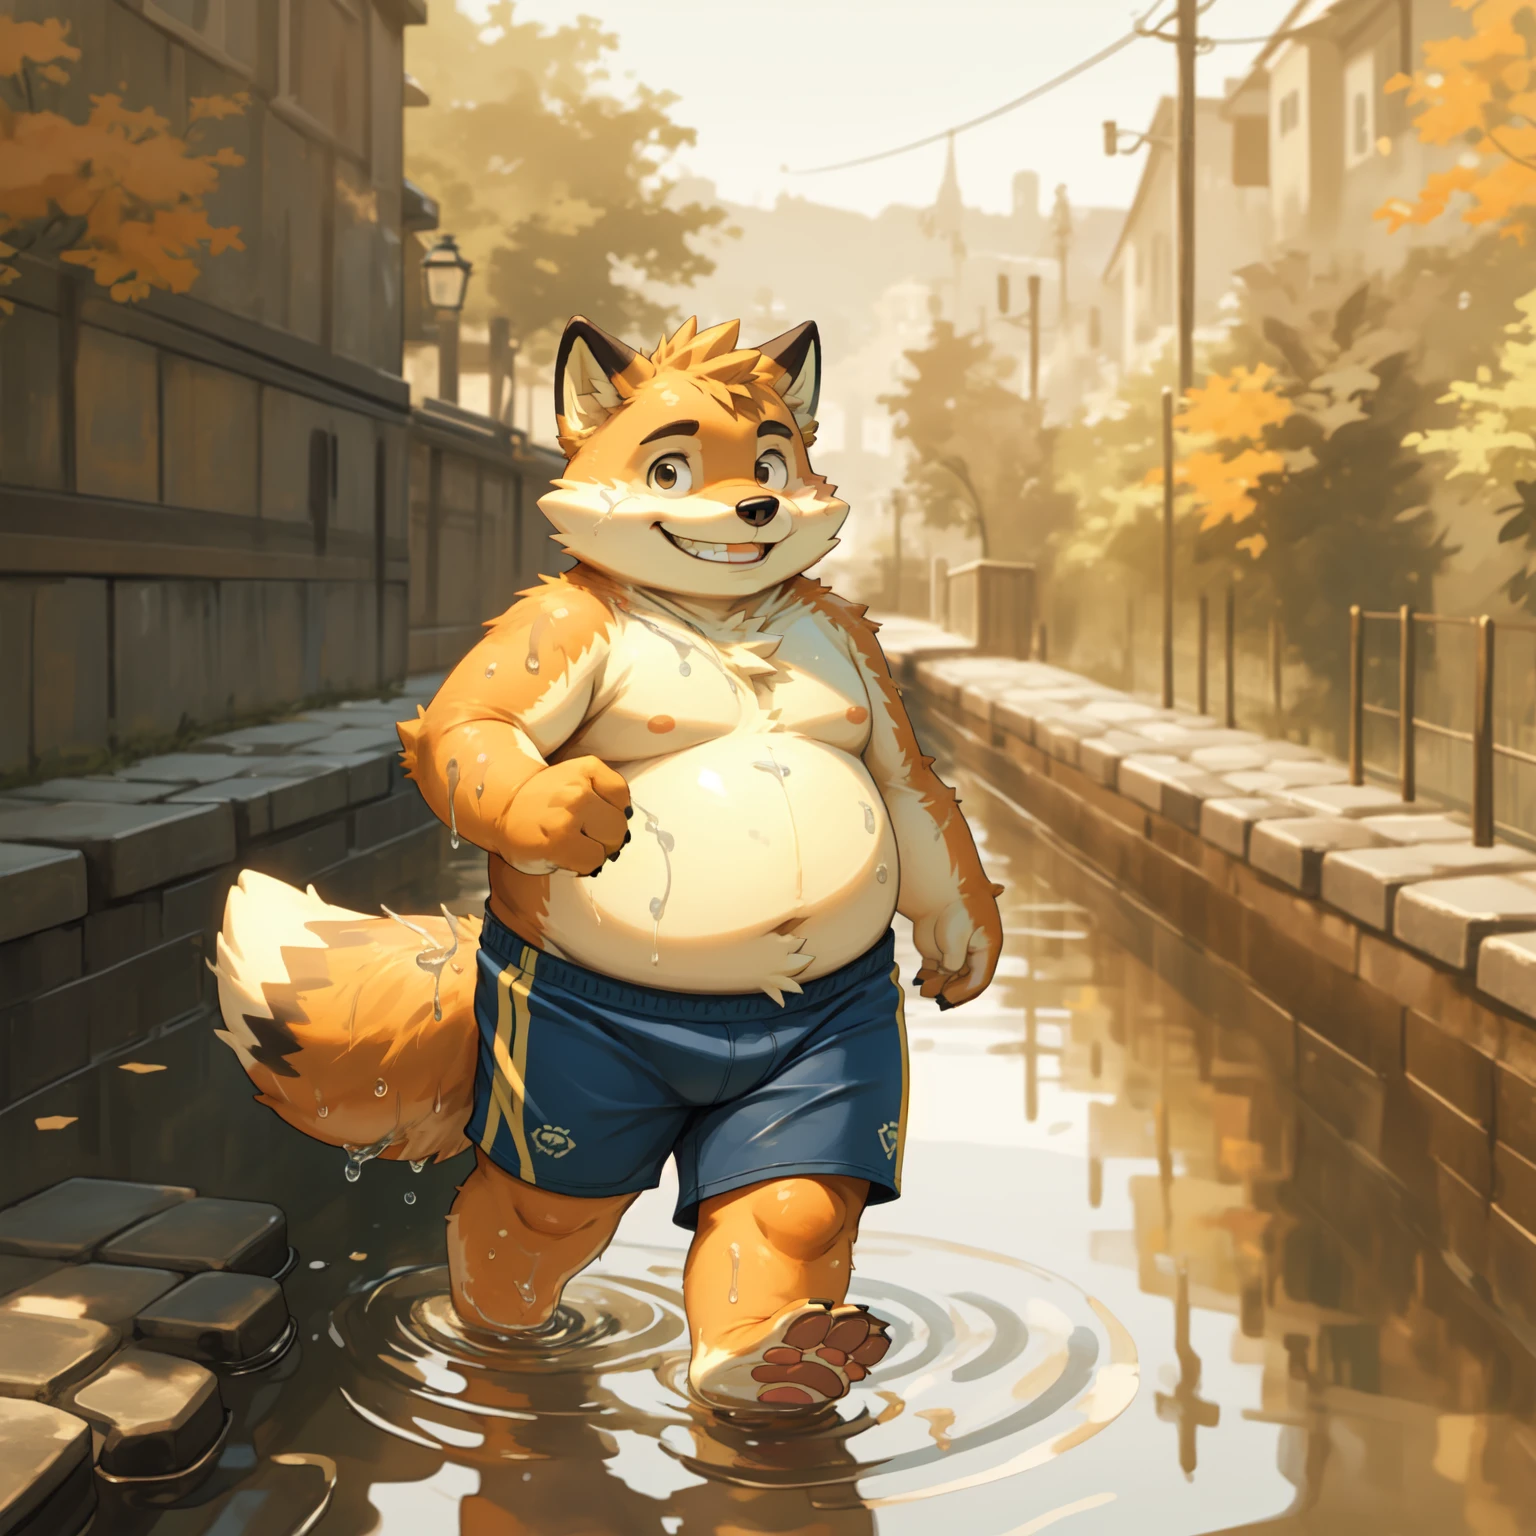 New Jersey 5 Furry，fox，portrait,Exquisite，Chubby，Orange plush fur，Cute face，Handsome，，Topless，shorts，riverside，cobblestone，Playing in the water，Smile